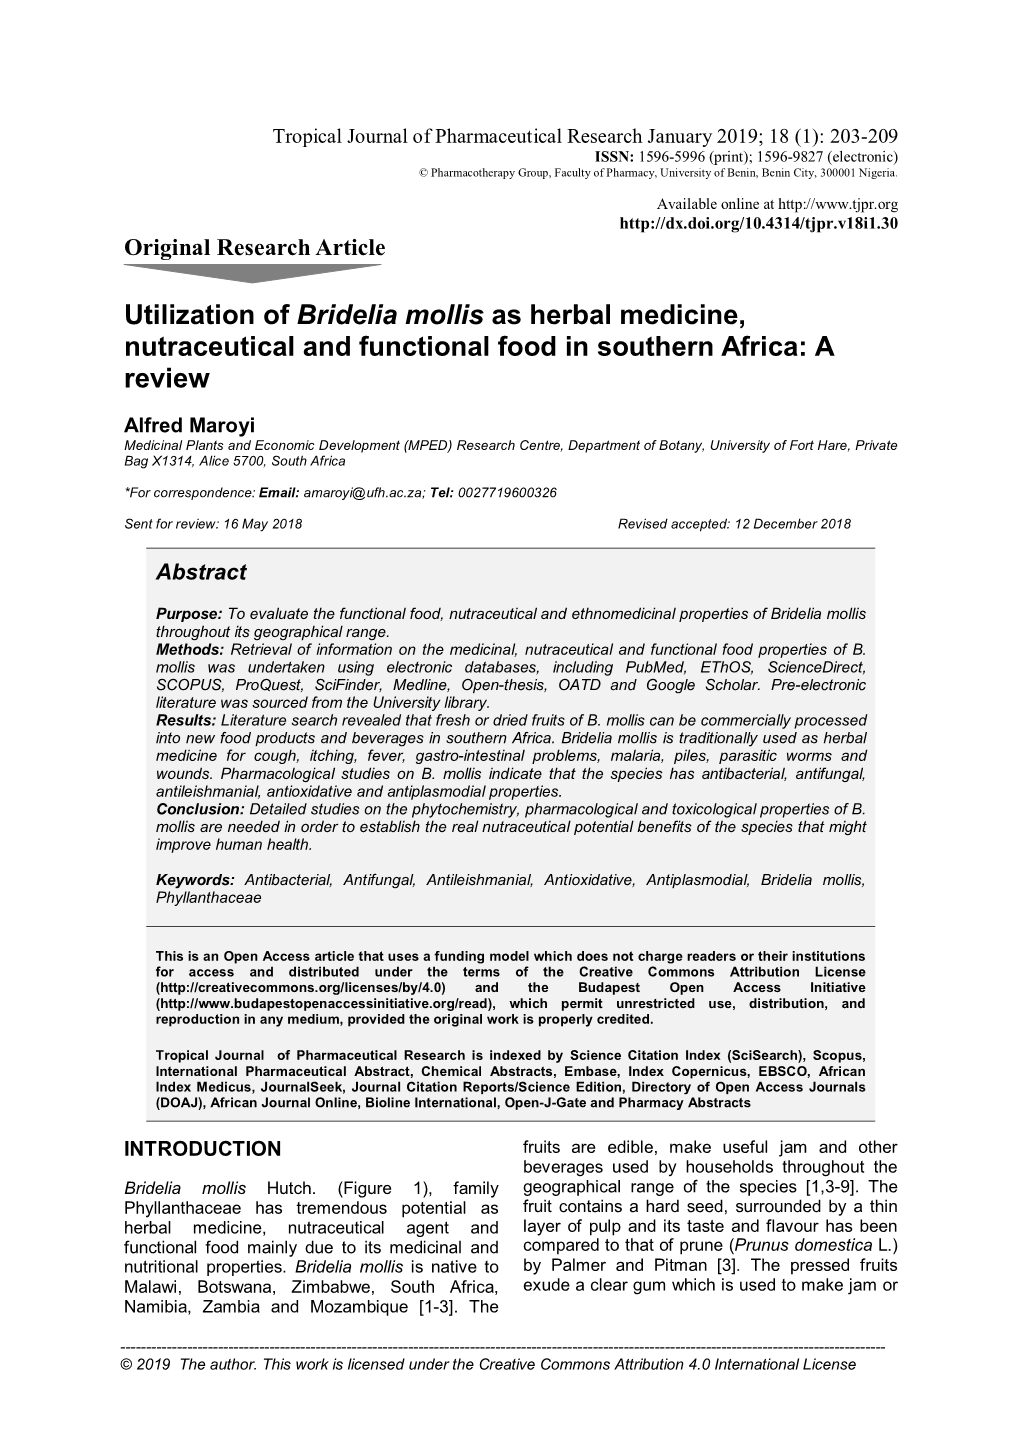 Utilization of Bridelia Mollis As Herbal Medicine, Nutraceutical and Functional Food in Southern Africa: a Review